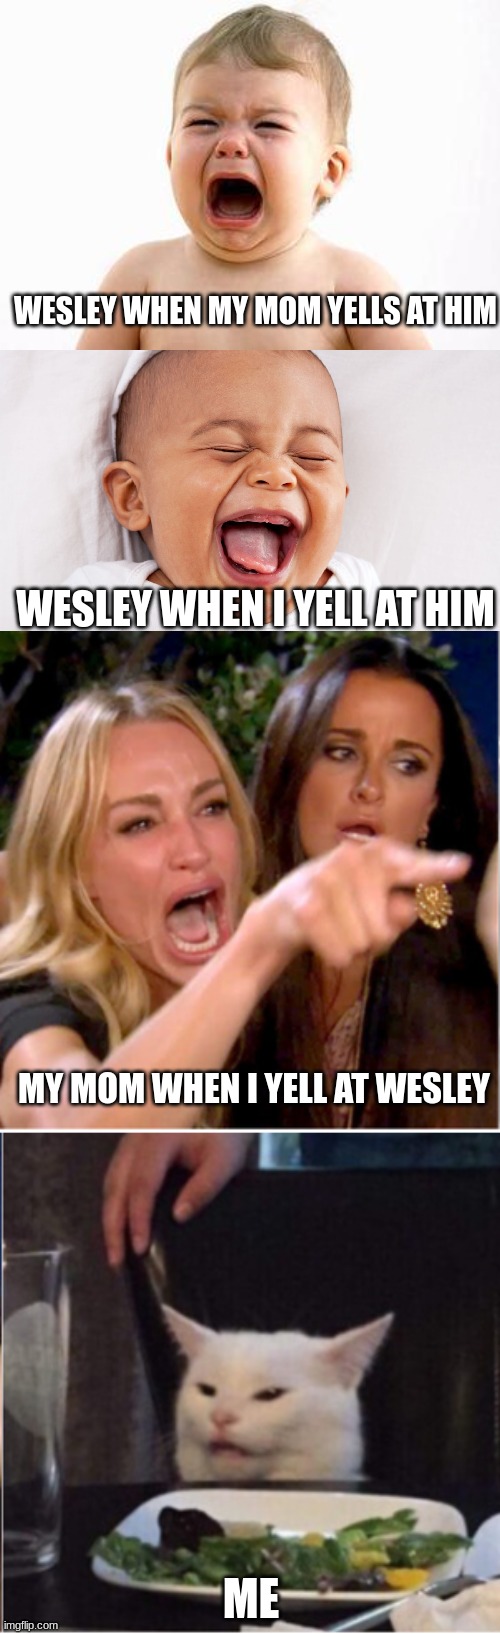 MOM!! | WESLEY WHEN MY MOM YELLS AT HIM; WESLEY WHEN I YELL AT HIM; MY MOM WHEN I YELL AT WESLEY; ME | image tagged in baby,woman yelling at cat,mom | made w/ Imgflip meme maker